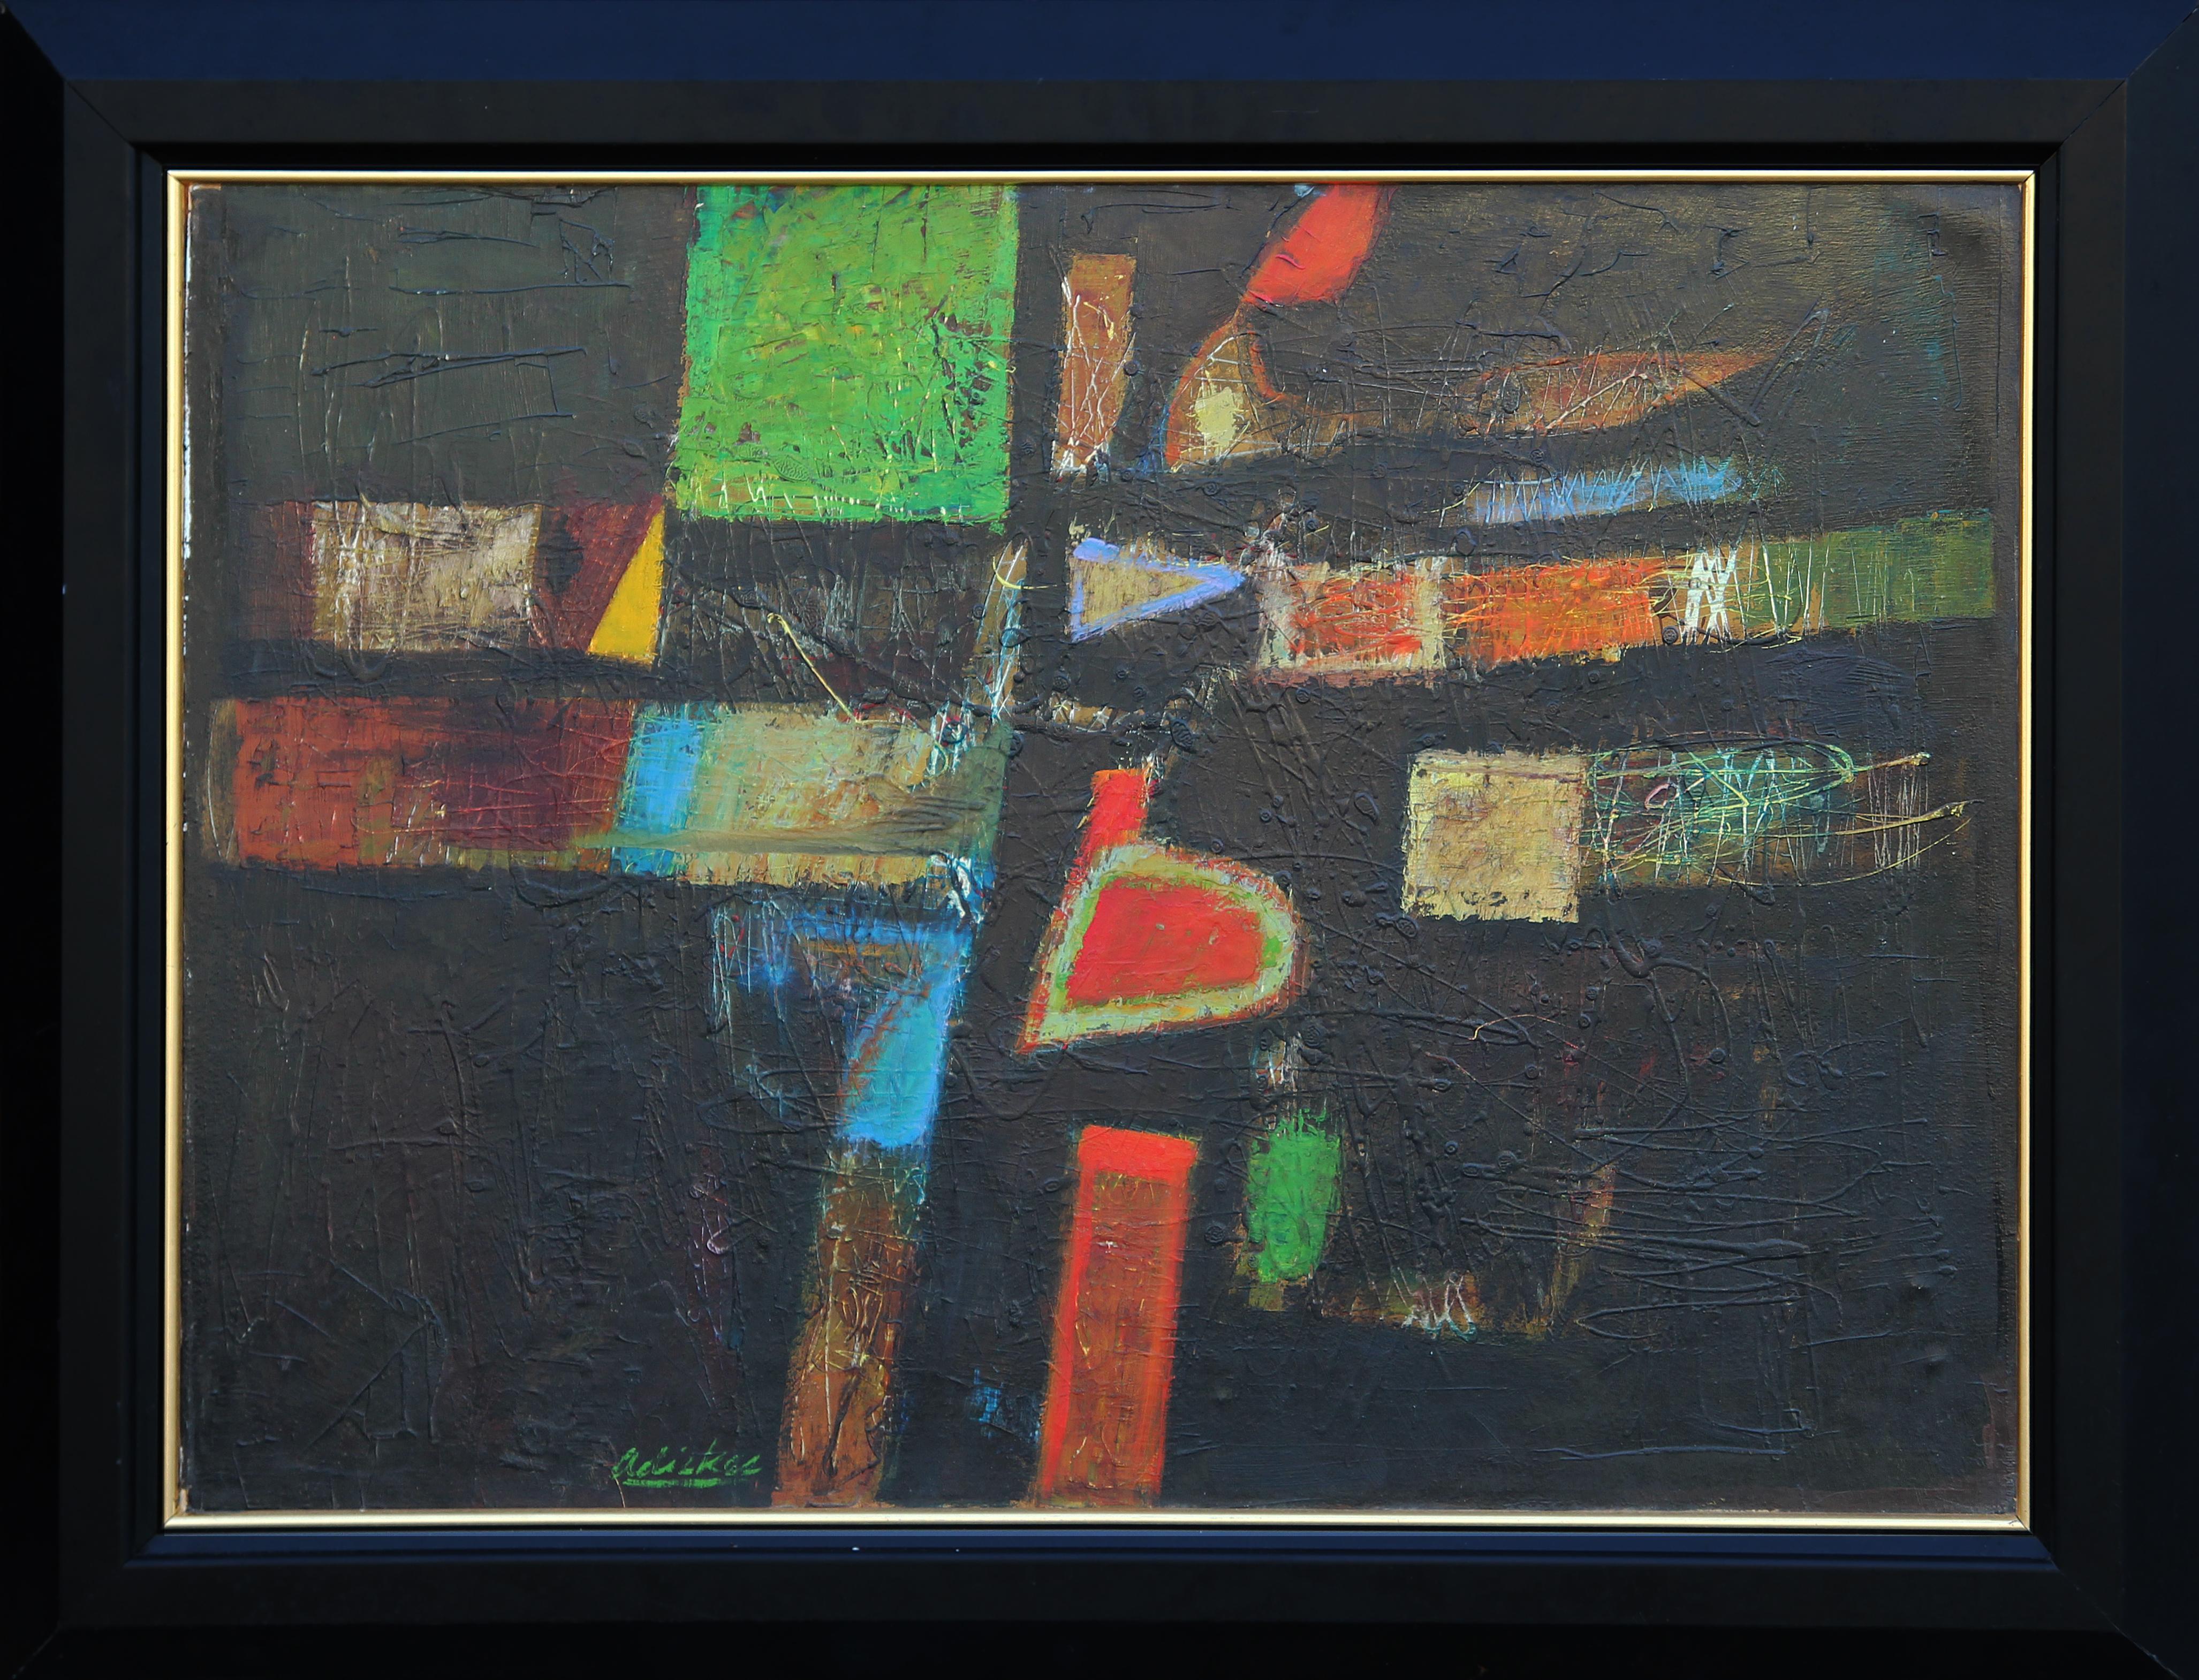 David Adickes Abstract Painting - "Forms" Black, Green, Red, and Orange Abstract Geometric Painting